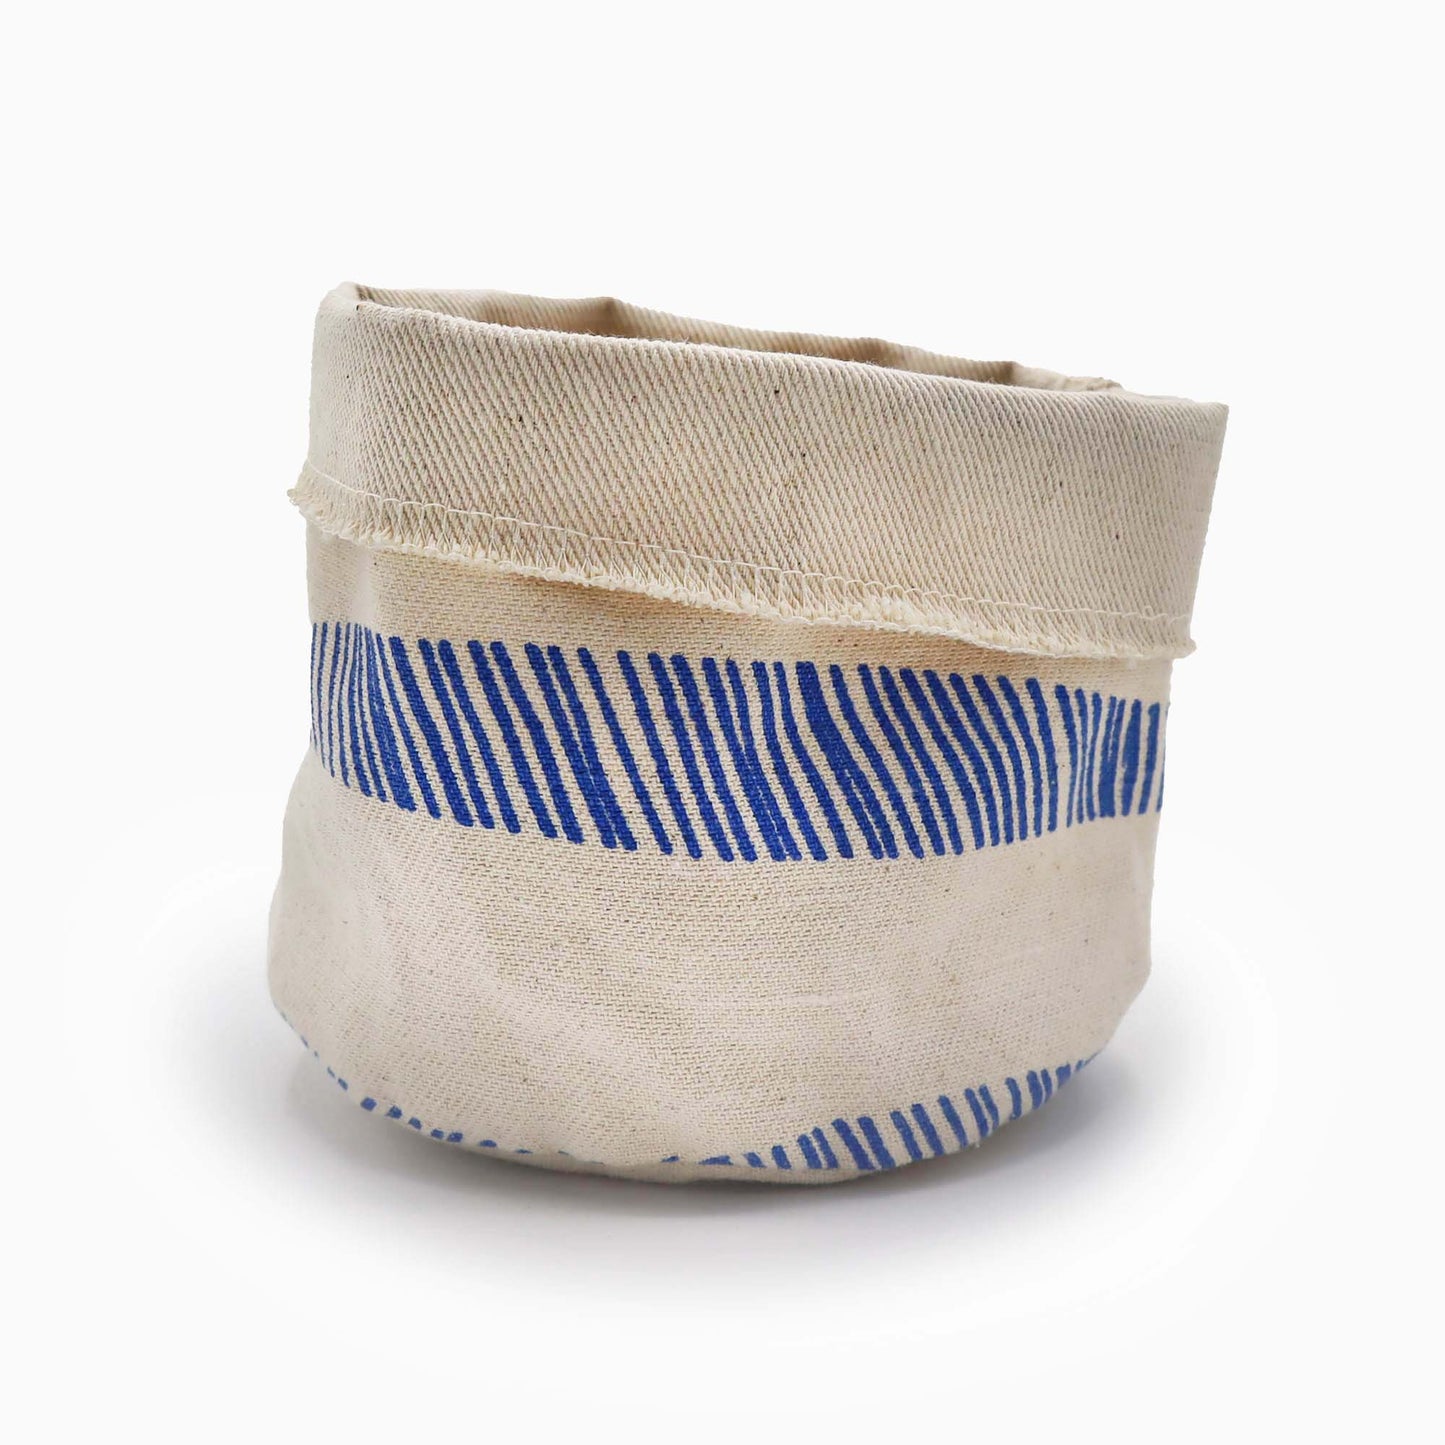 Canvas Printed Basket - Small